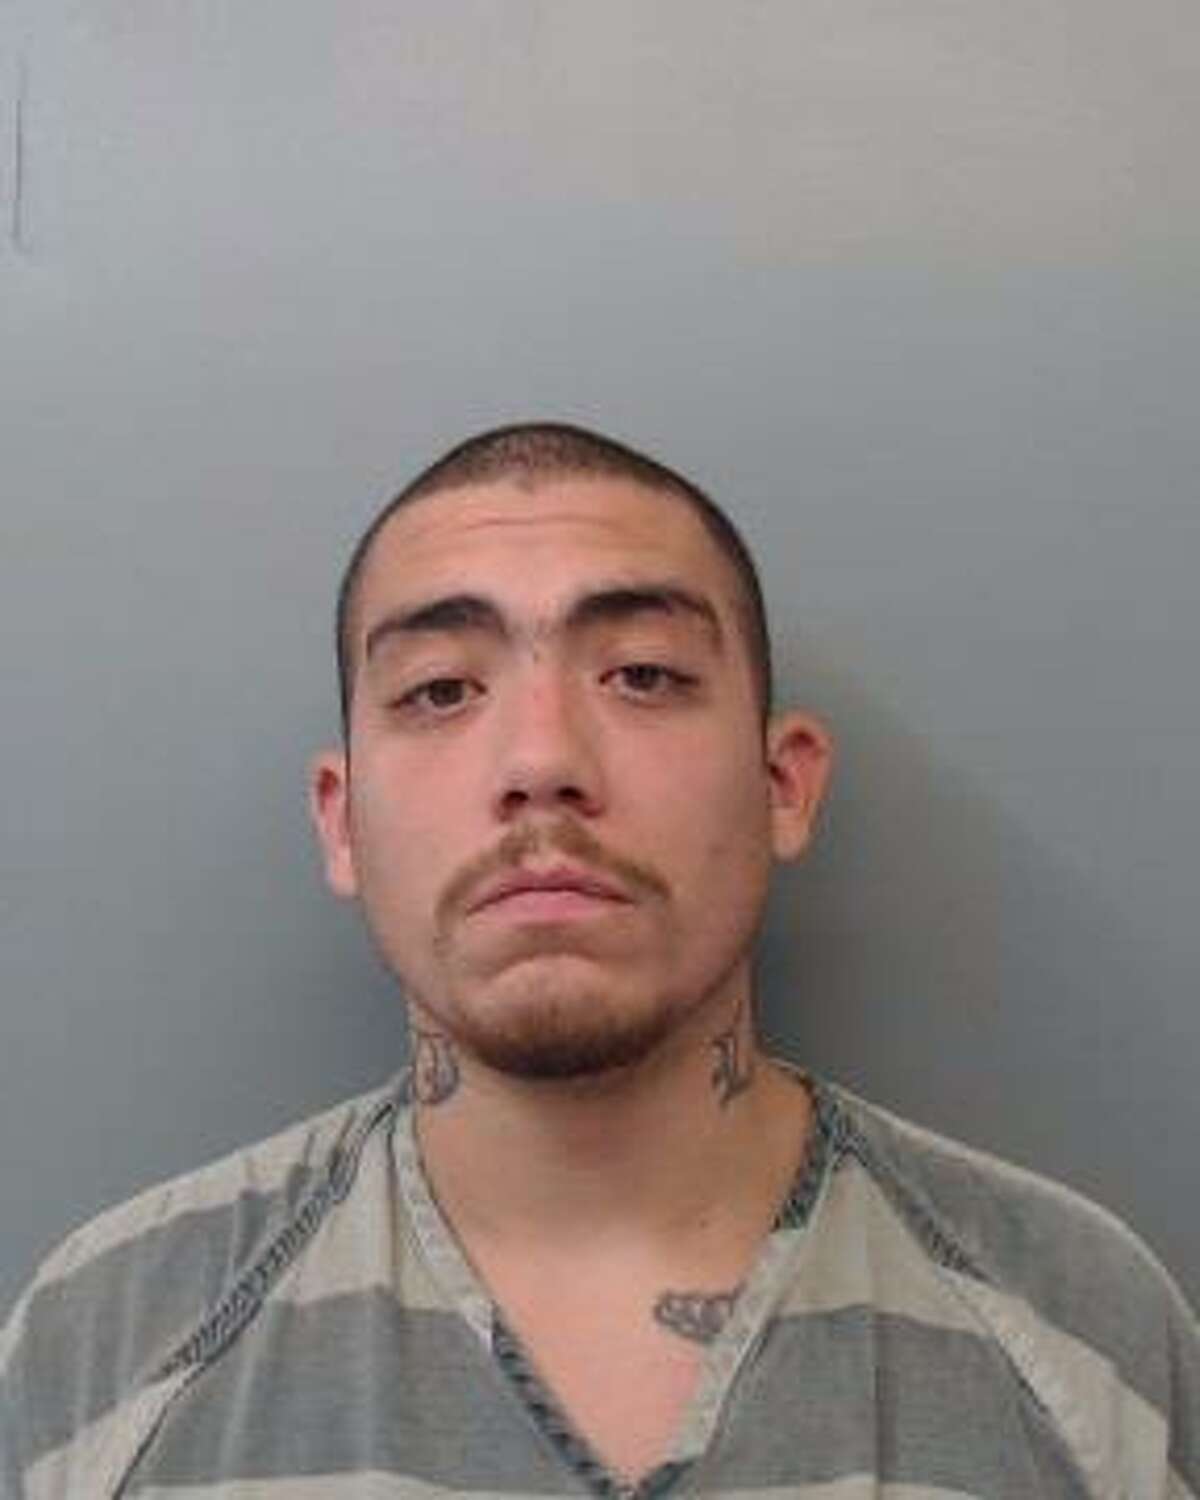 Justin Jay de Luna, 26, was charged with assault, family violence.